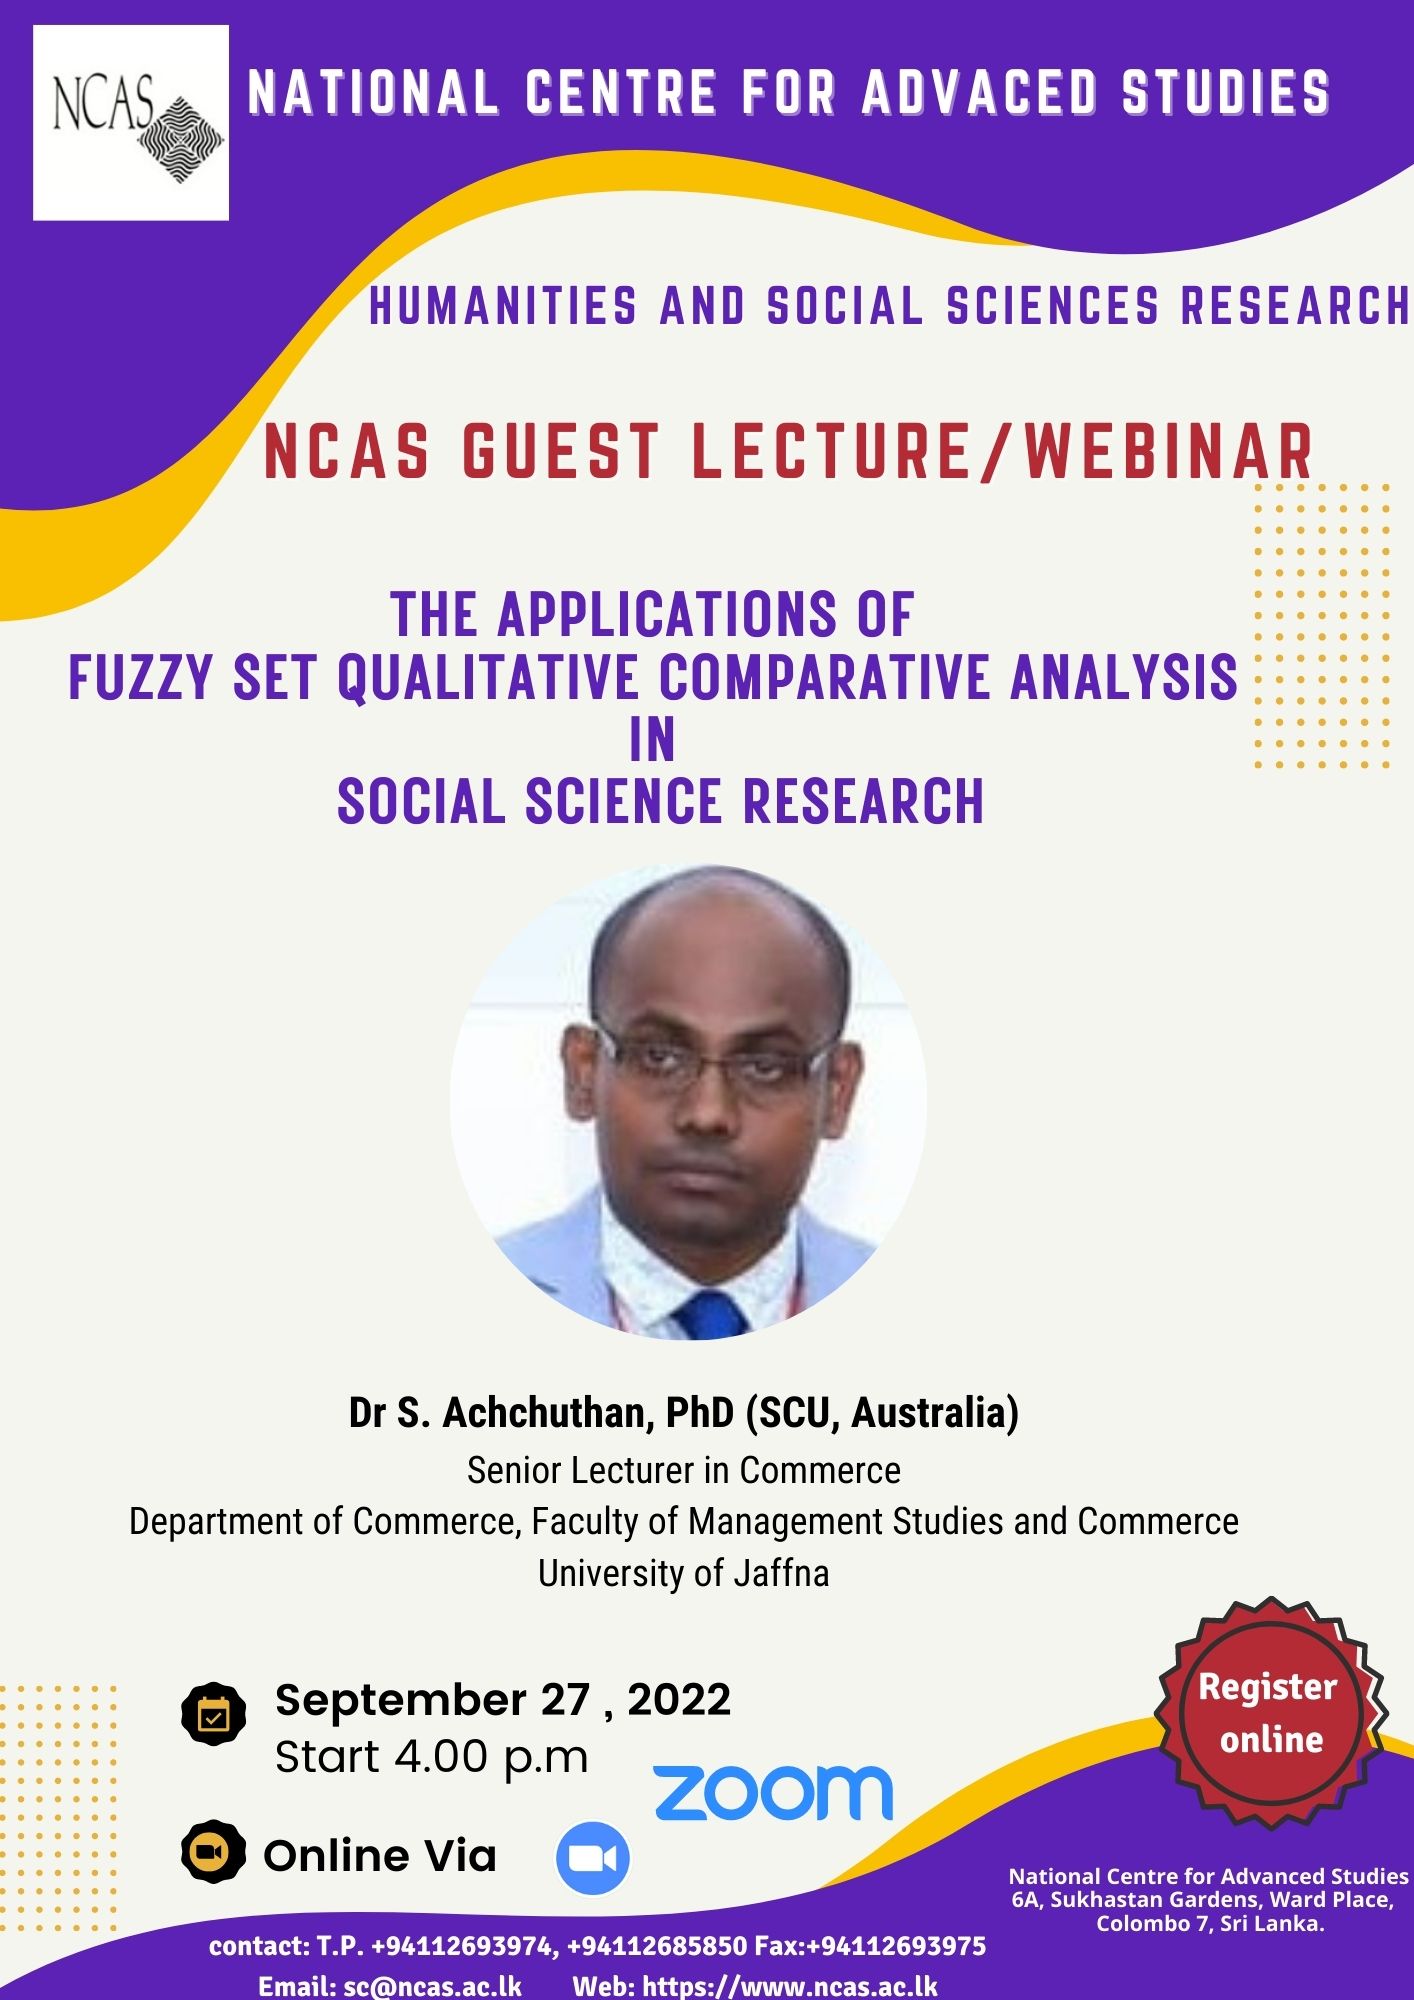 Guest Lecturer on The applications of Fuzzy set qualitative comparative analysis in Social Science Research